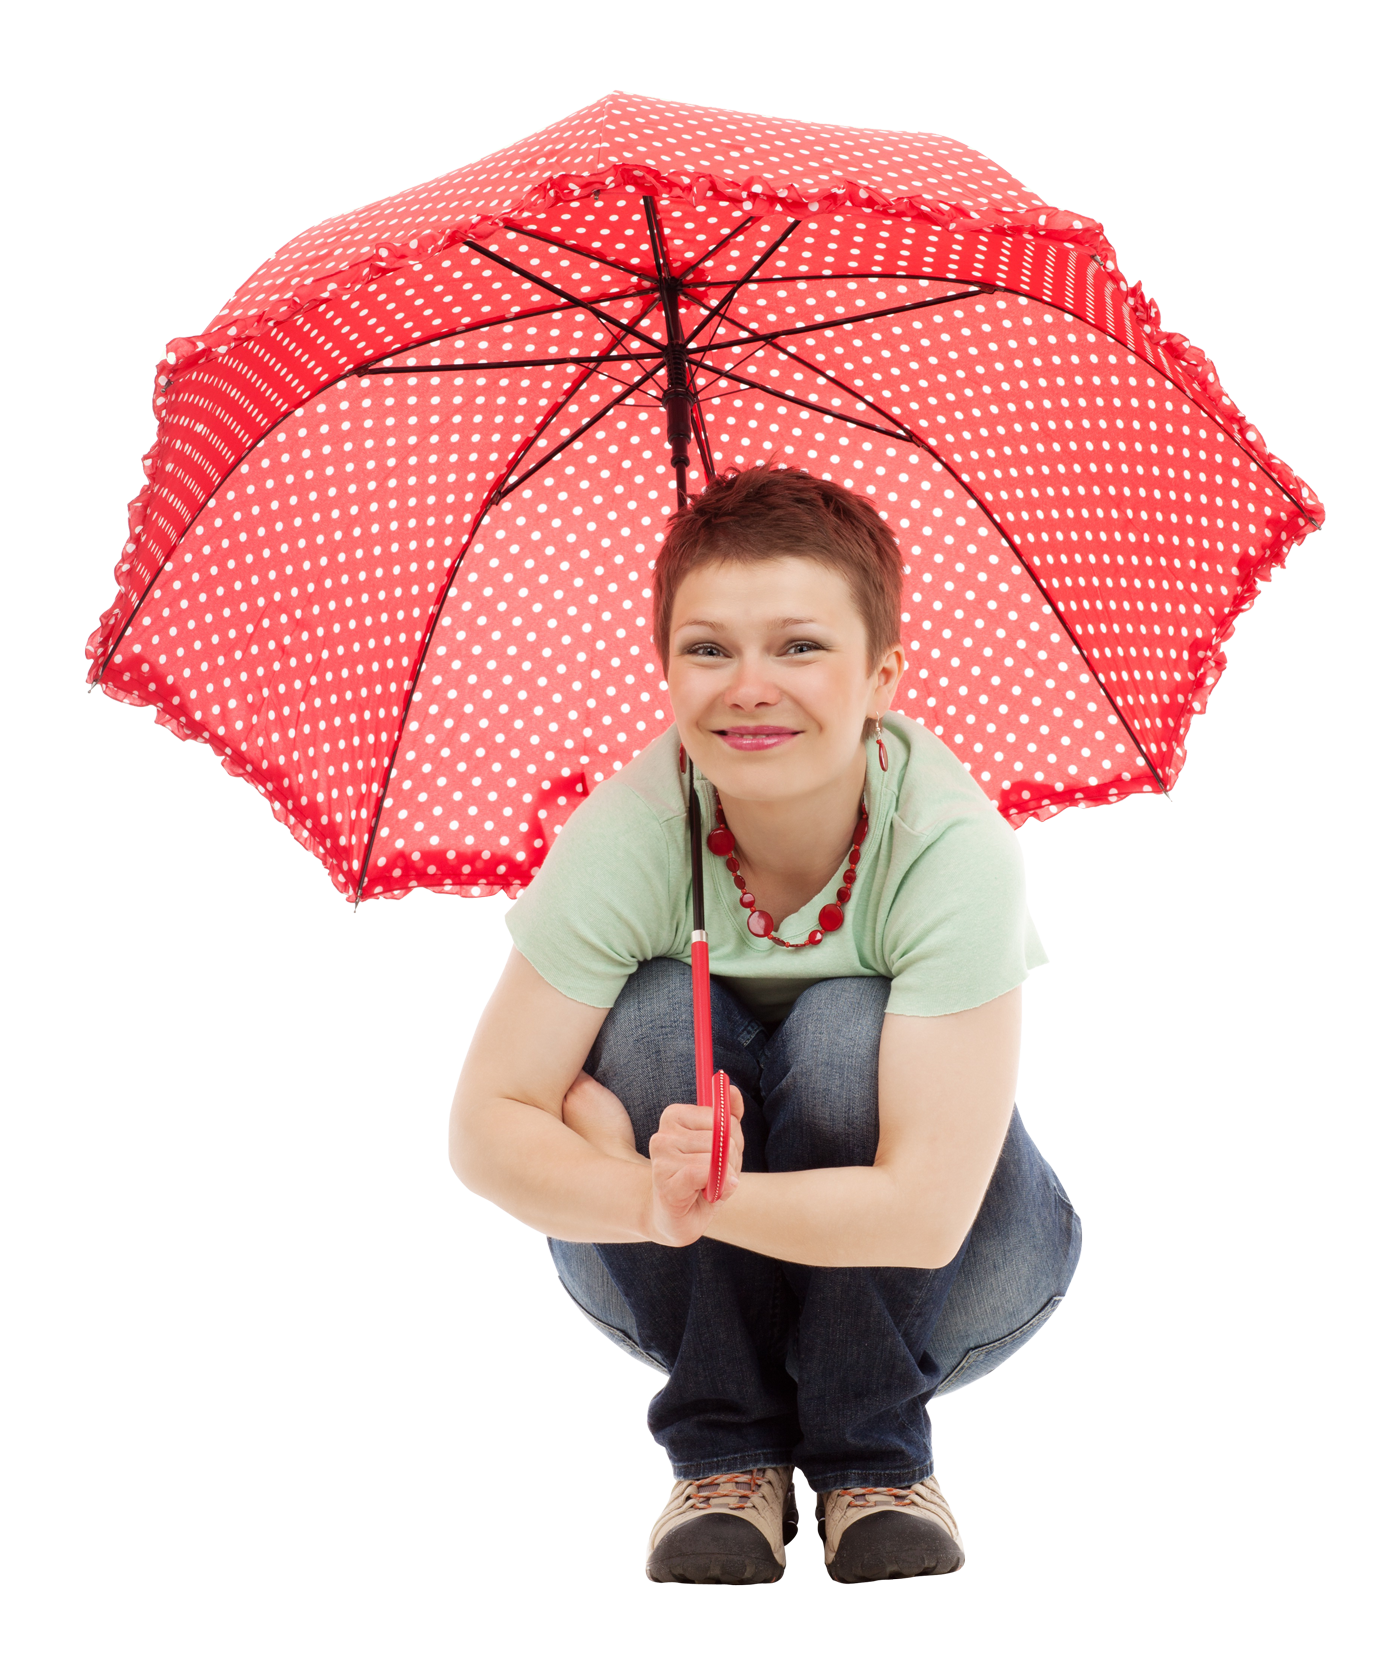 A Woman Holding A Red Umbrella